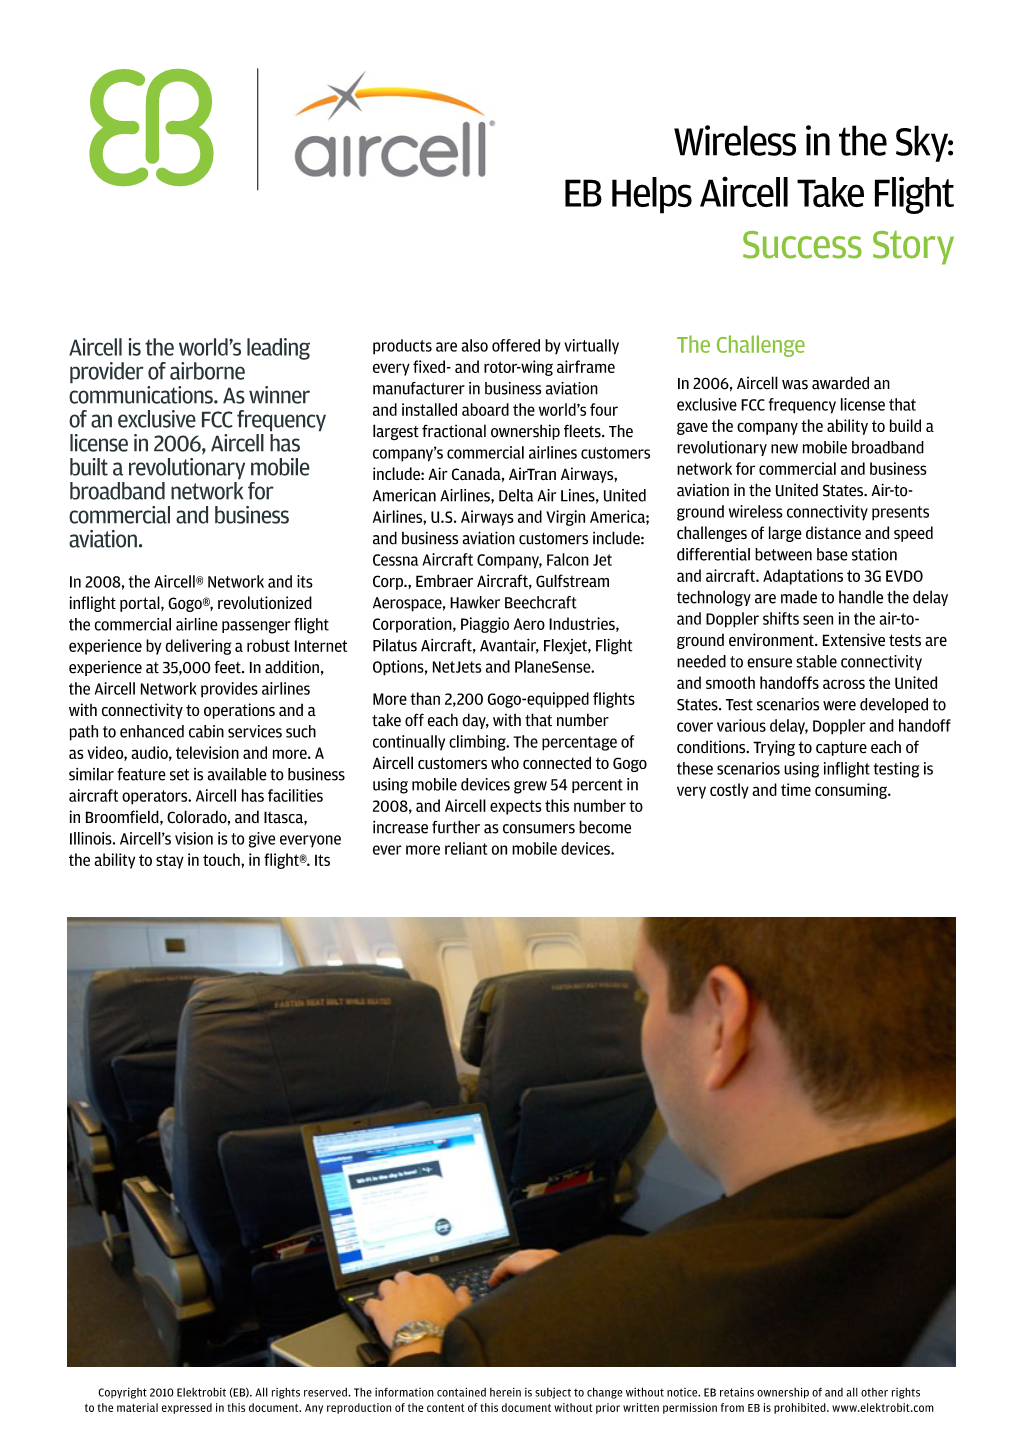 EB Helps Aircell Take Flight Success Story